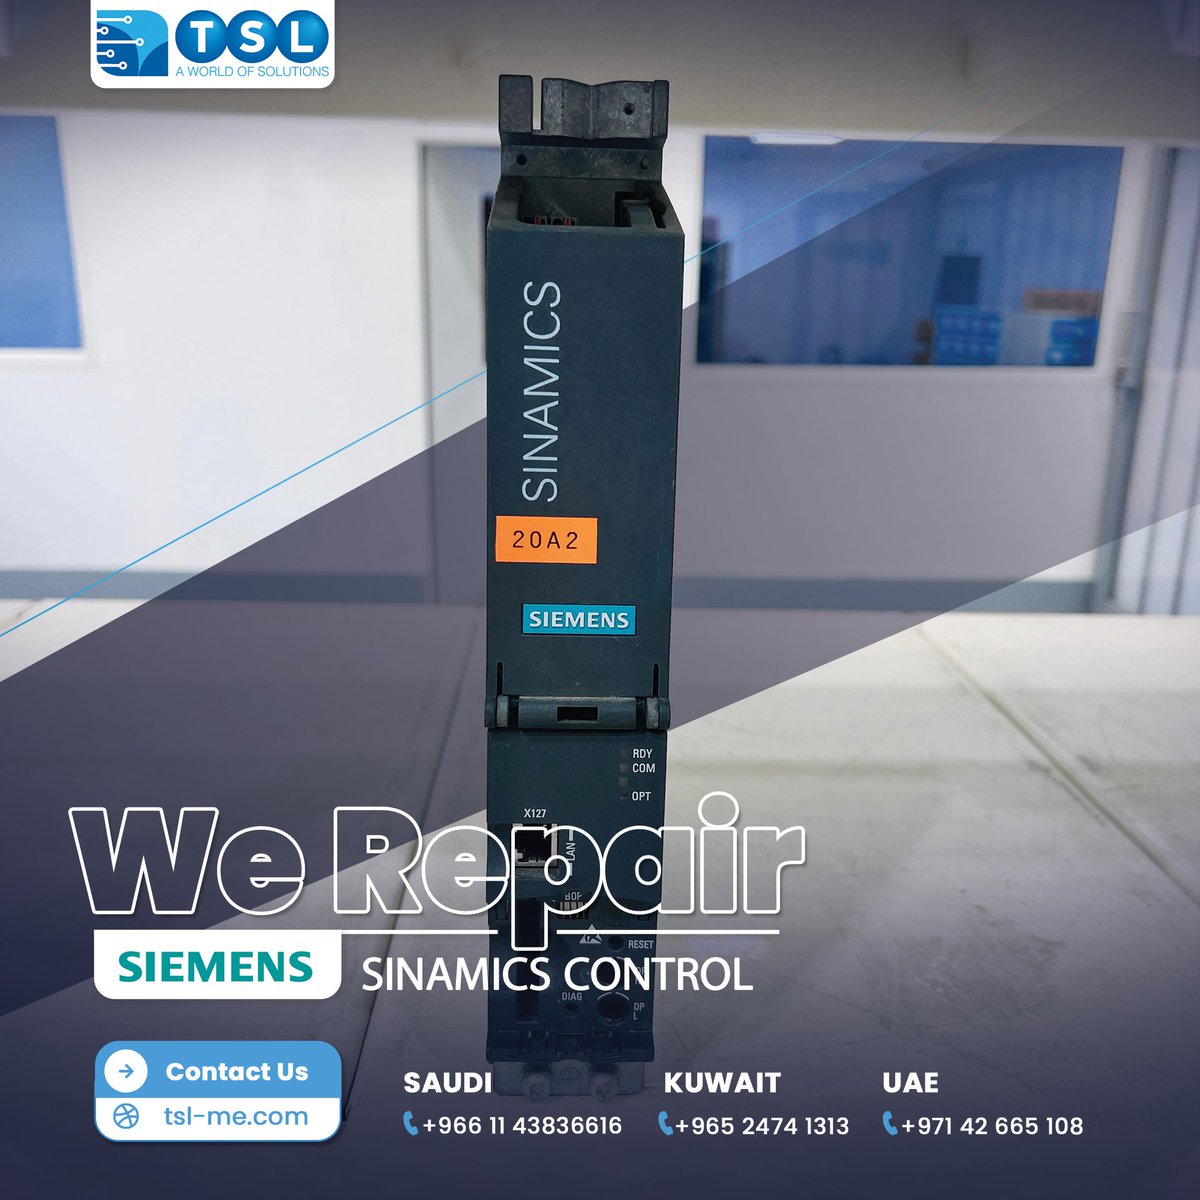 Our professional team successfully 𝐑𝐞𝐩𝐚𝐢𝐫𝐢𝐧𝐠 𝐒𝐈𝐄𝐌𝐄𝐍𝐒 - 𝐒𝐈𝐍𝐀𝐌𝐈𝐂𝐒 Controllers.
For 𝐈𝐧𝐝𝐮𝐬𝐭𝐫𝐢𝐚𝐥 𝐑𝐞𝐩𝐚𝐢𝐫 𝐨𝐫 𝐒𝐮𝐩𝐩𝐥𝐲 inquiries, contact us Directly:
📌Email: info@tsl-me.com
#tsl #electronicsrepair #industrialrepair #siemens #controller